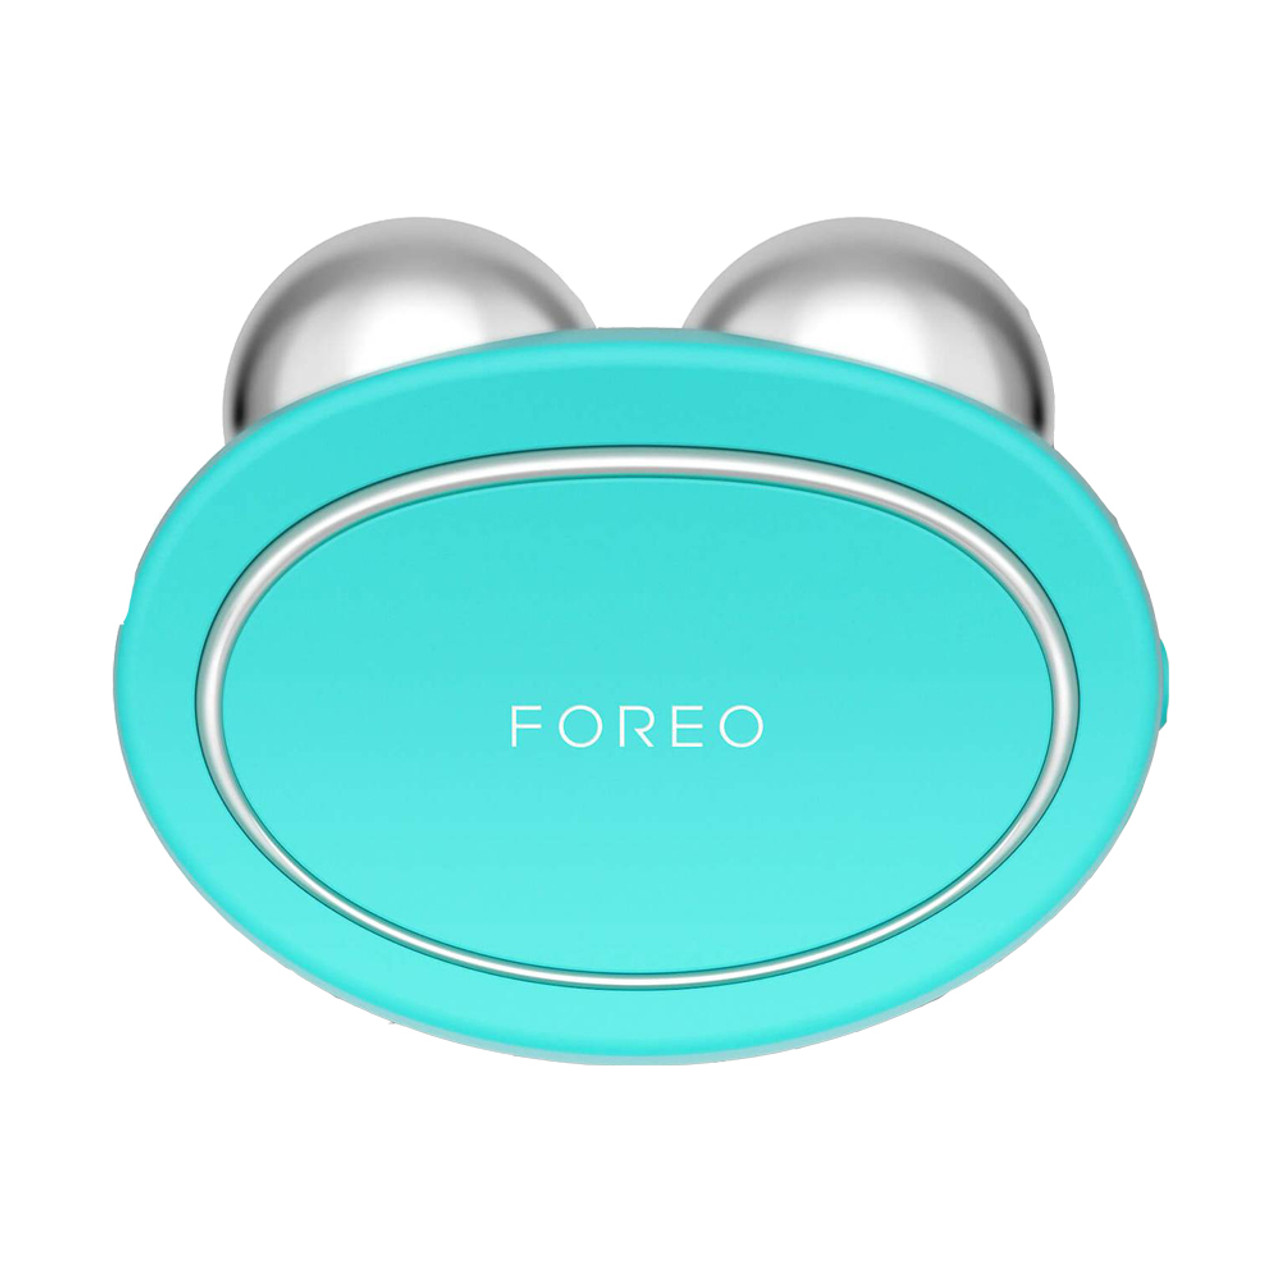 FOREO BEAR Facial Toning Device - Mint | Bath & Unwind | Official